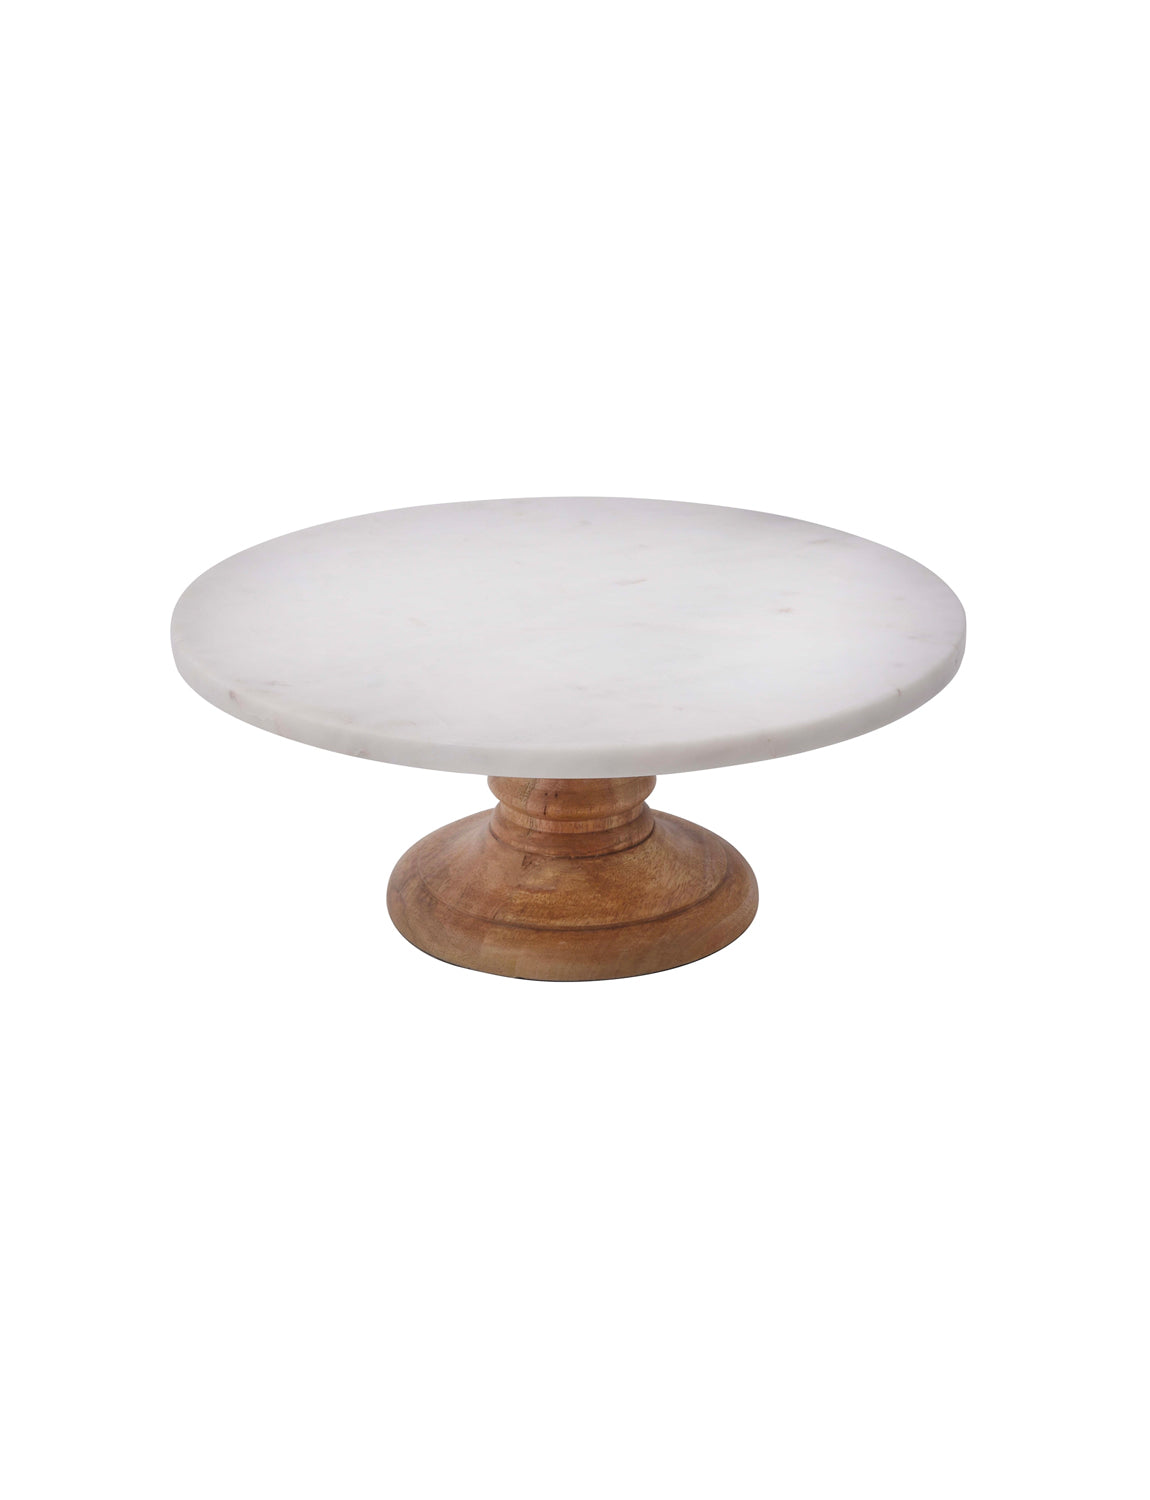 Large Marble Plate on Mango Wood Stand